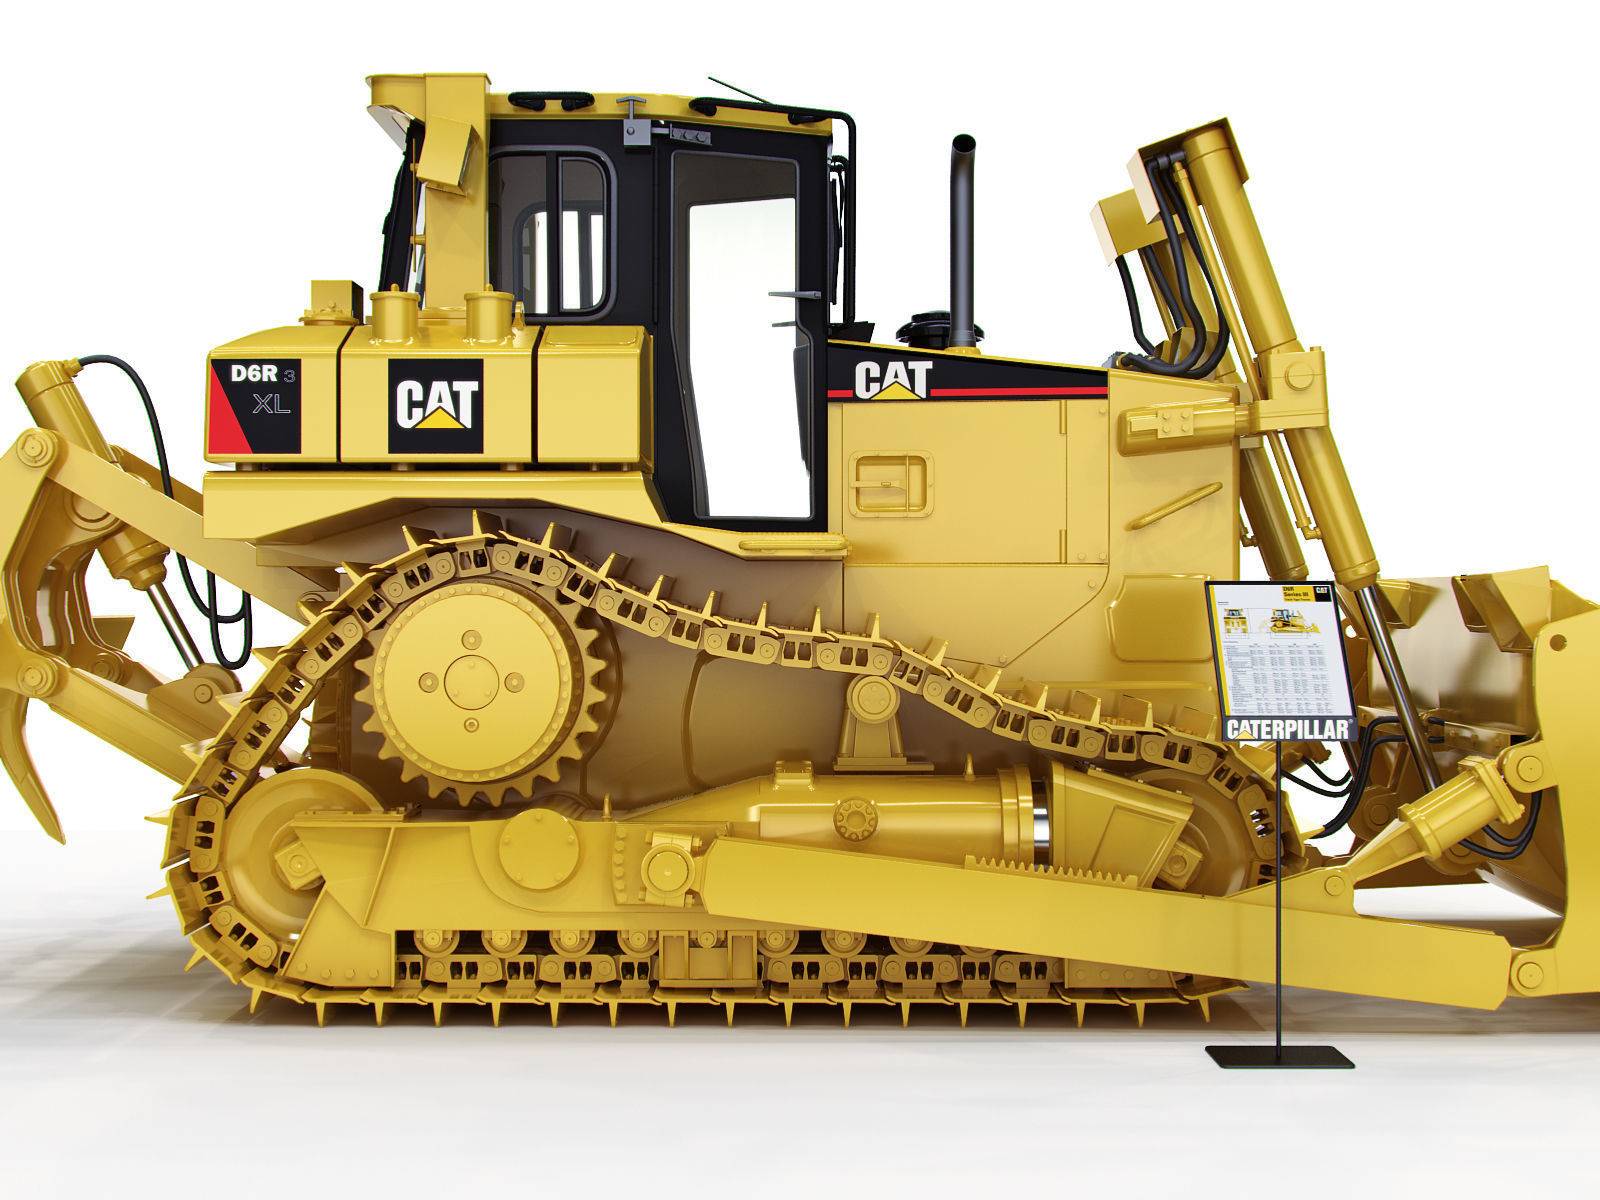 Caterpillar d11 specifications, price, review & overview 2023